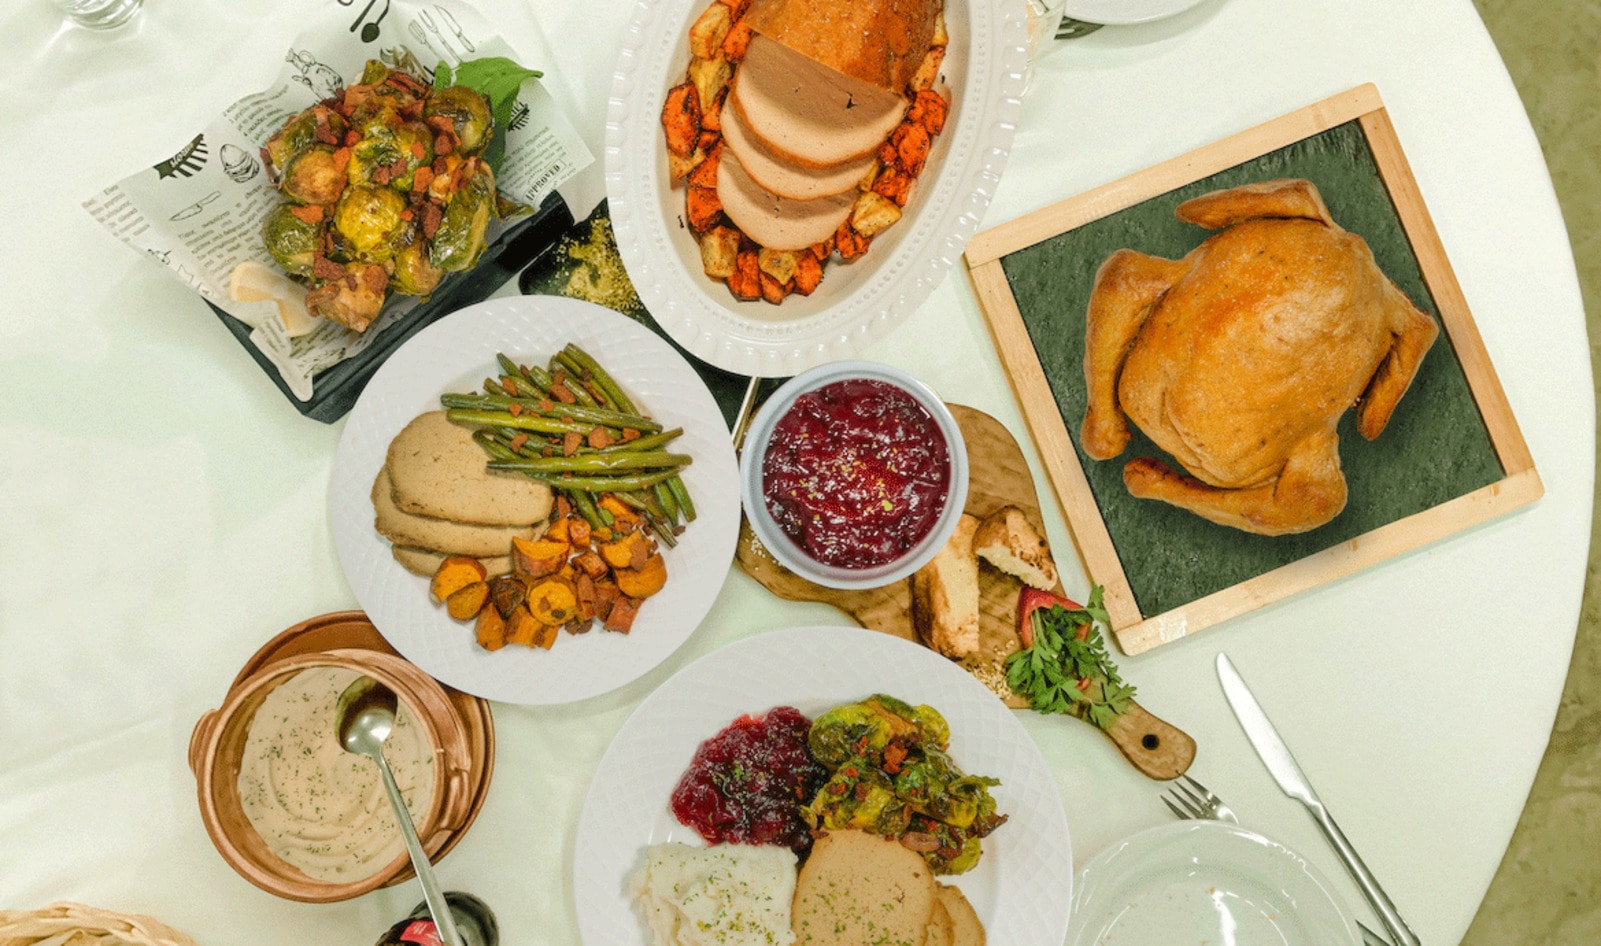 You Can Now Order a “Whole Bird” Vegan Turkey for Thanksgiving